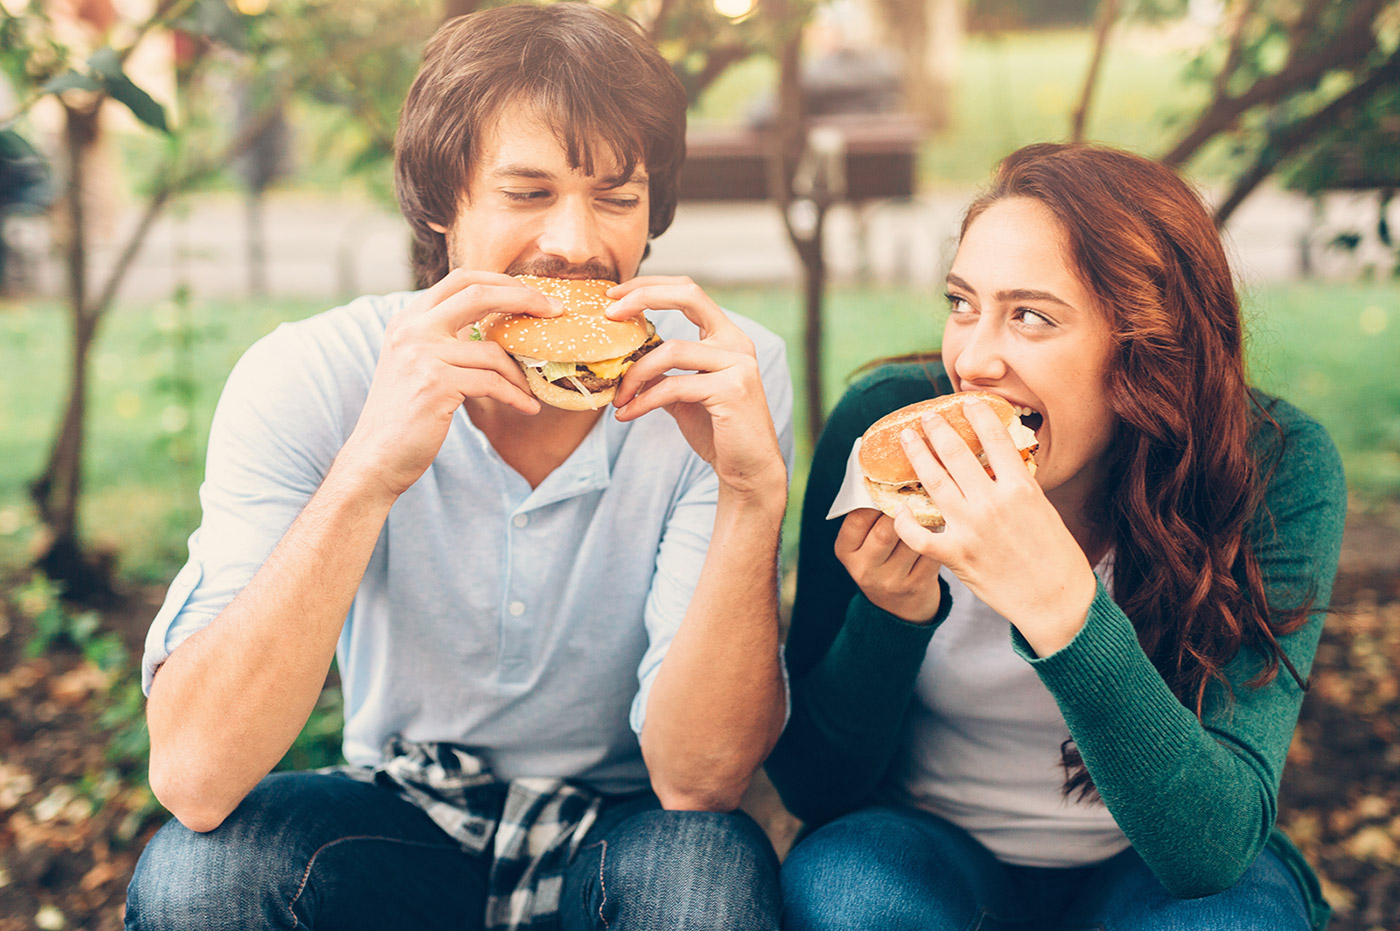 Man and woman in a park eating burgers